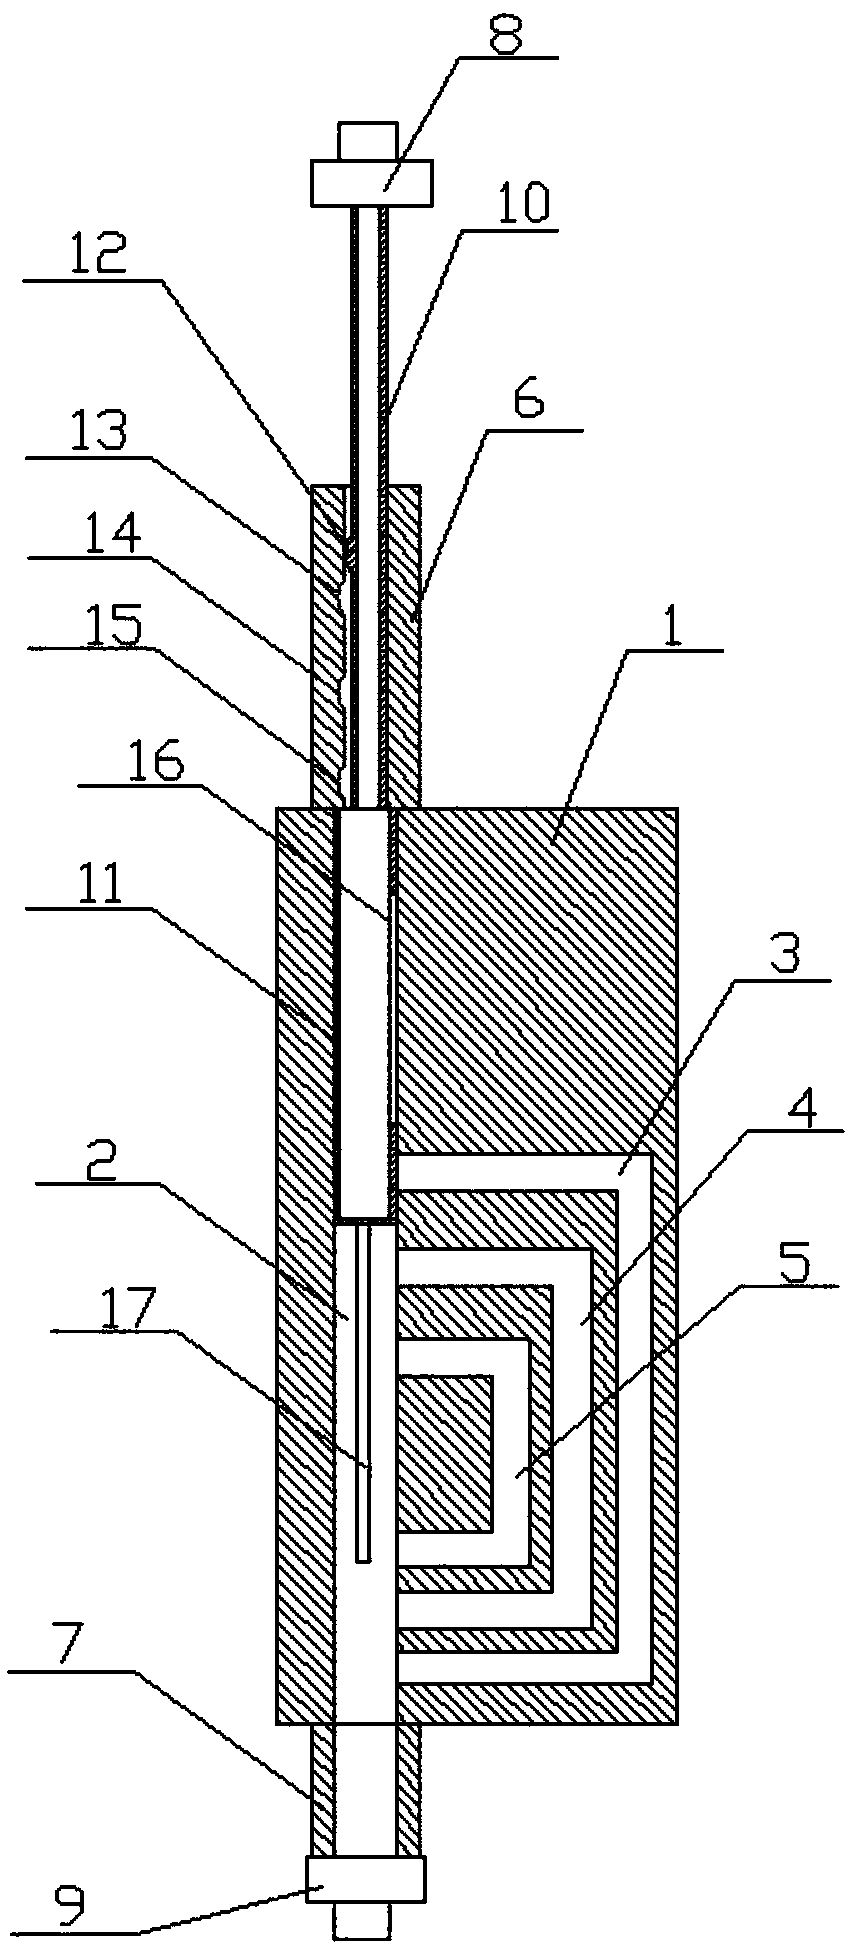 Multi-level flow control device applied to infusion pump